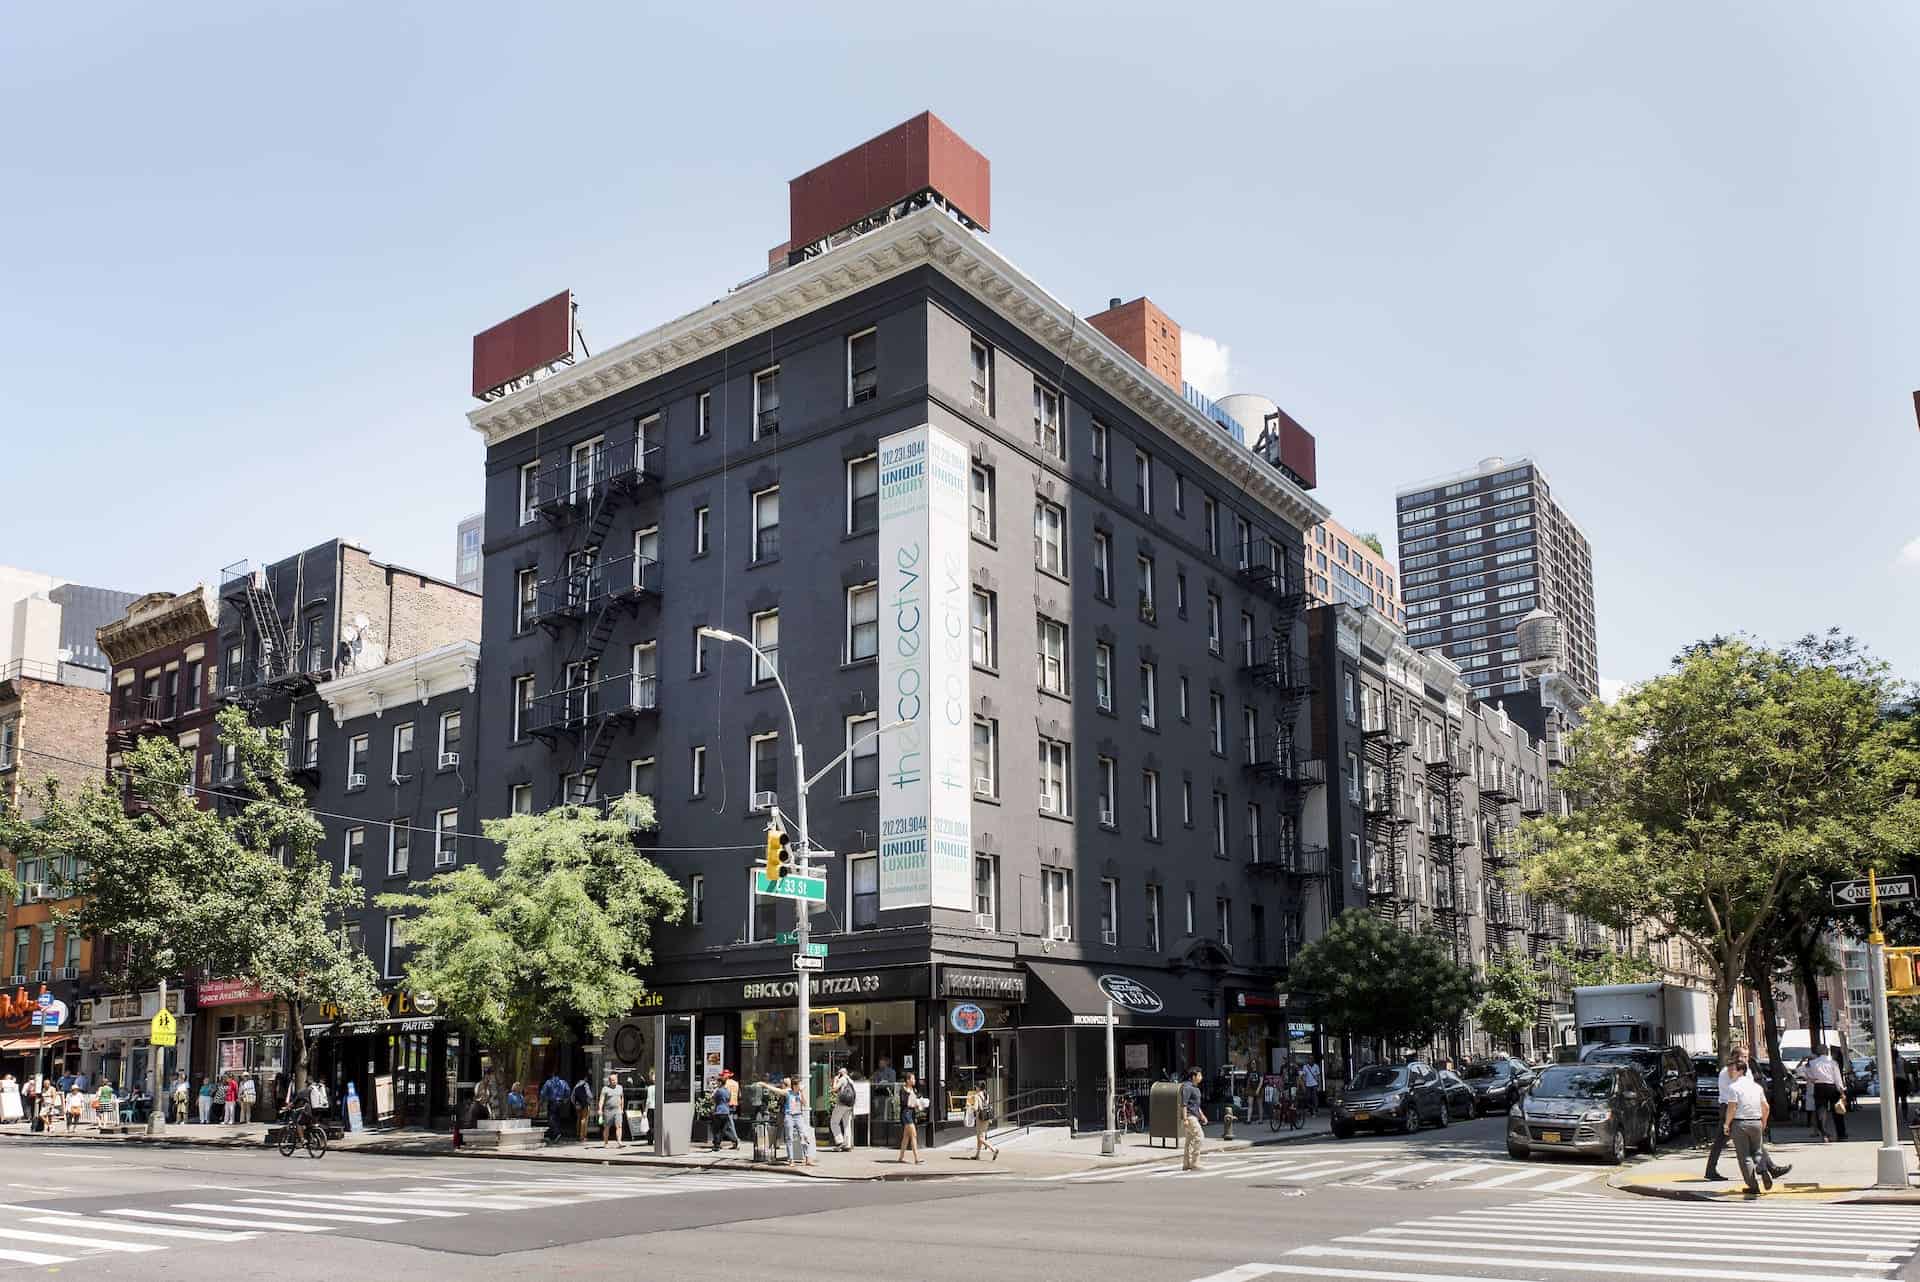 Street view of 207 East 33rd Street apartments in New York. A brick residential building with businesses on the first floor.